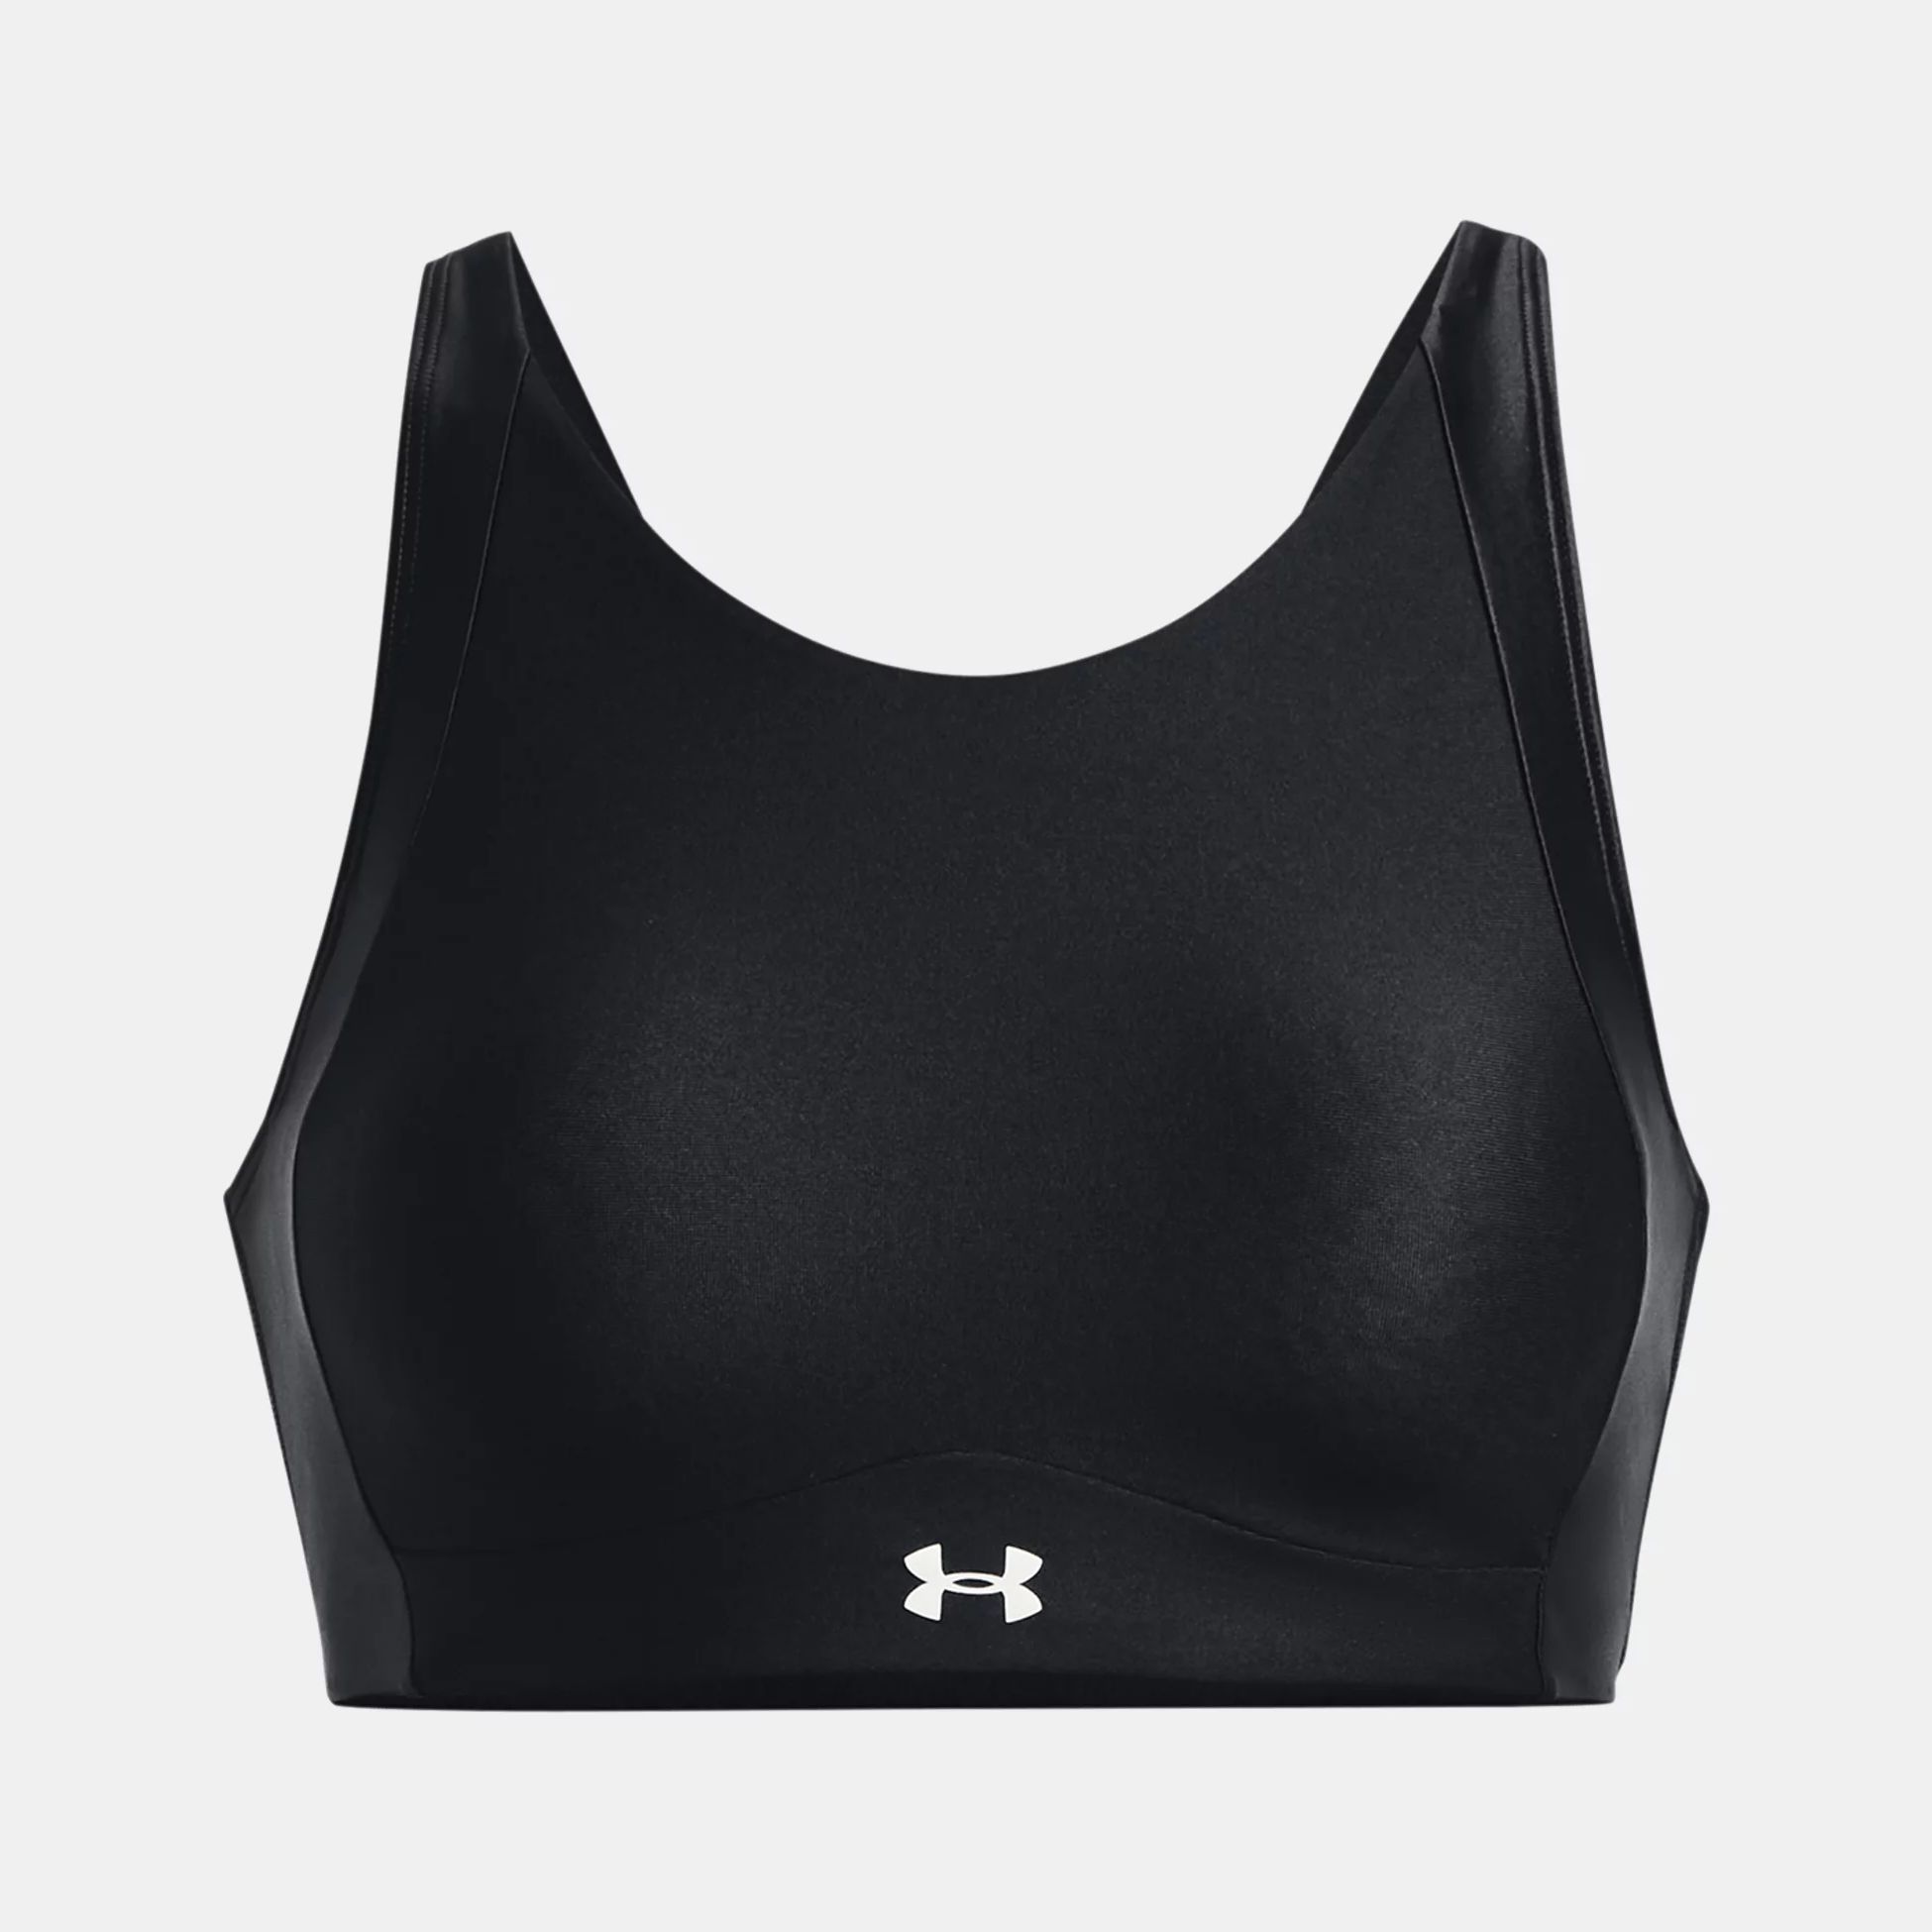 https://img2.sportconcept.ro/backend_nou/content/images/fitness-under-armour%20ua-infinity-mid-high-neck-shine-sports-bra-20220909123415.jpg